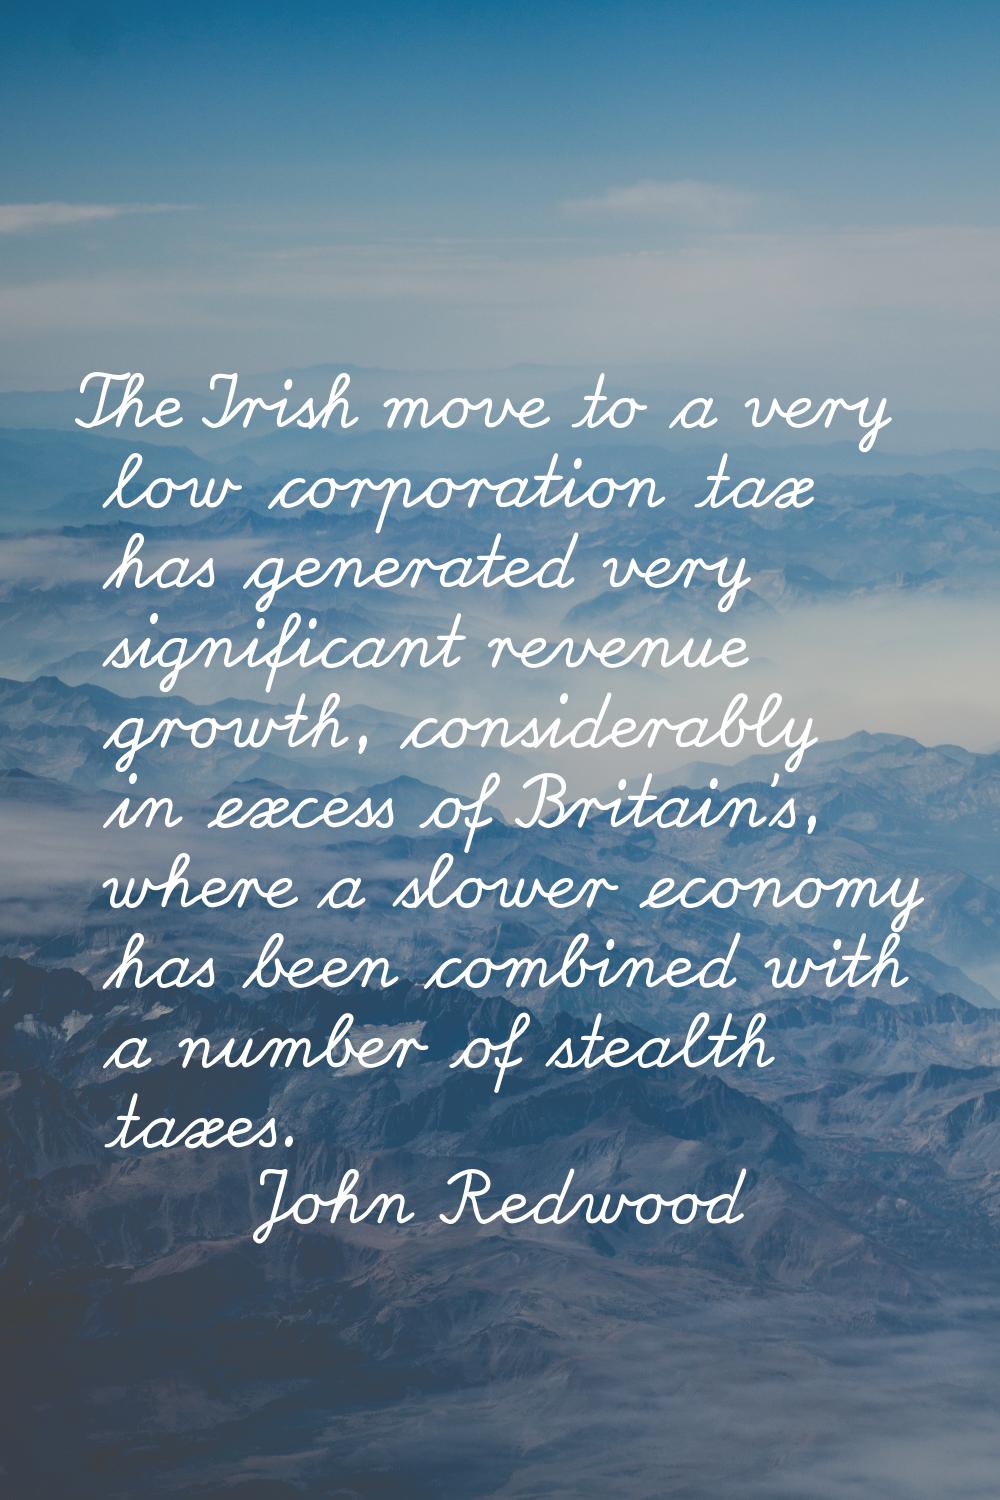 The Irish move to a very low corporation tax has generated very significant revenue growth, conside